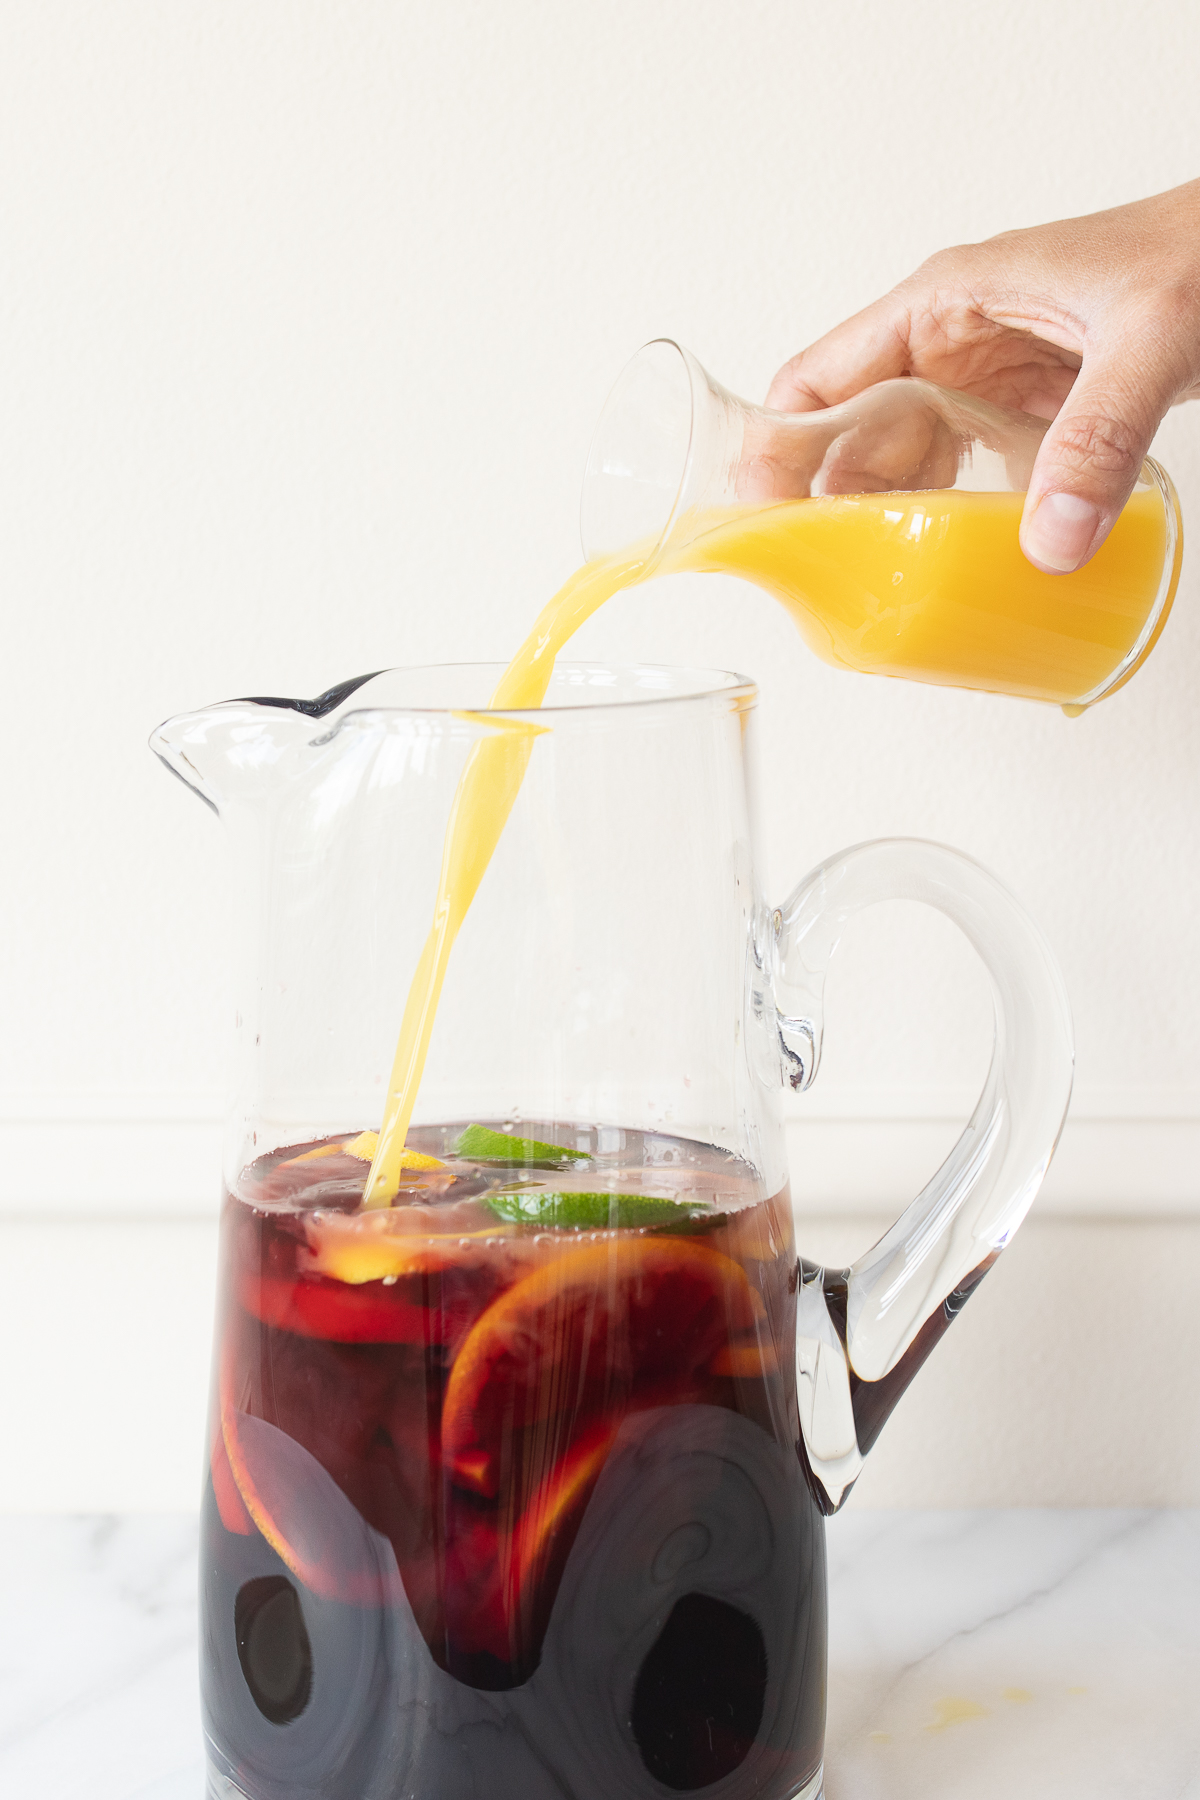 A glass pitcher full of red sangria, with orange juice being poured into it.